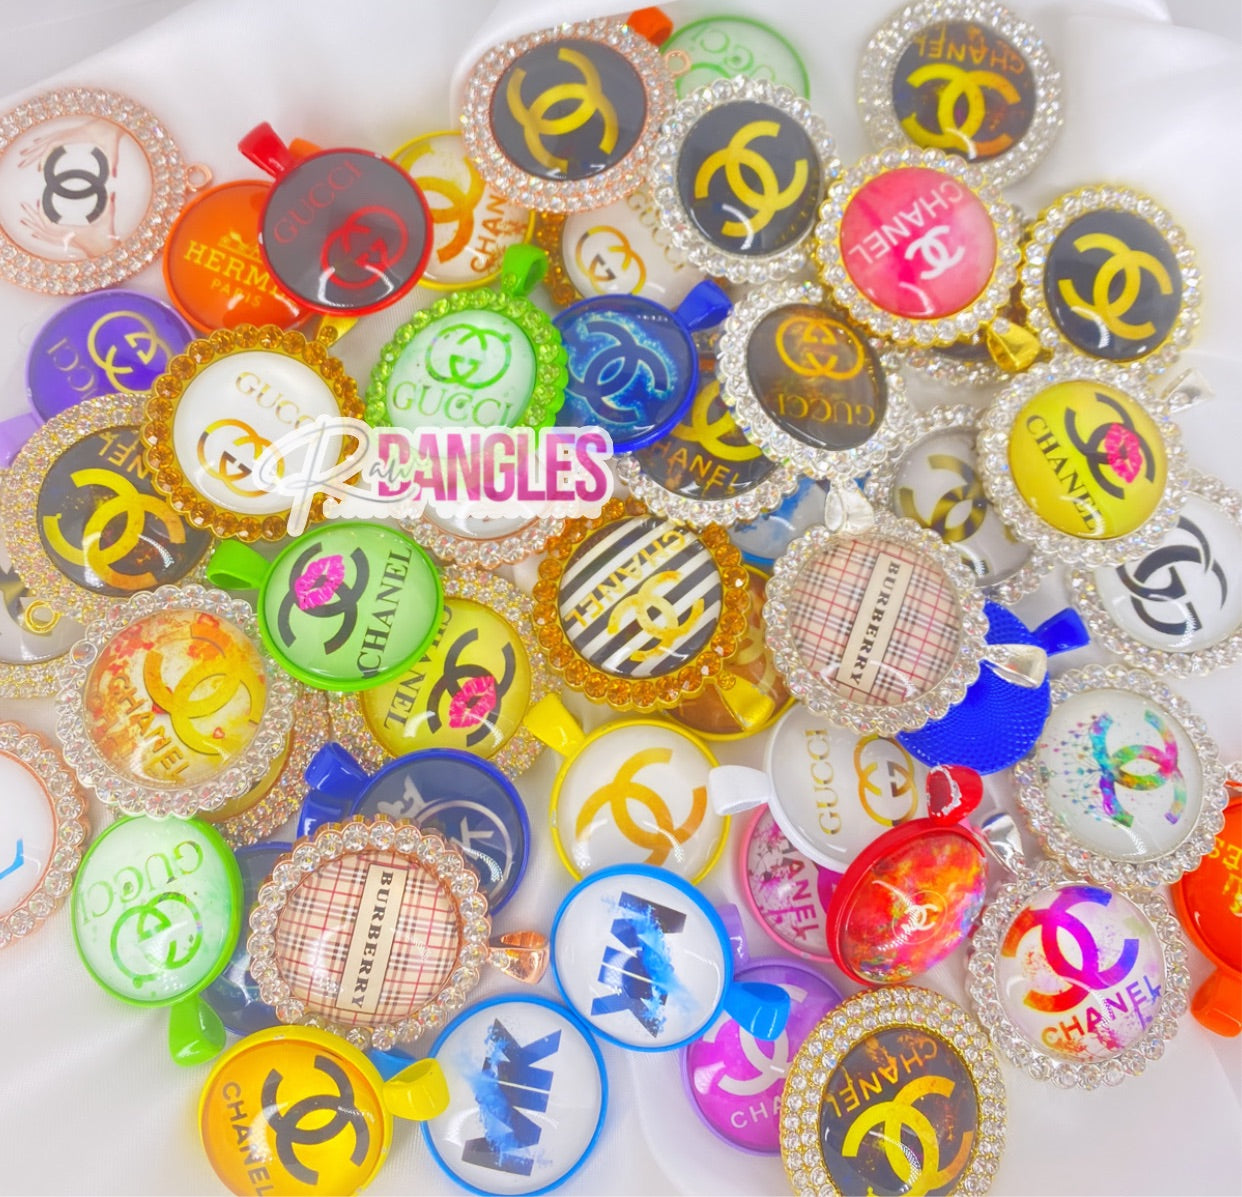 Chanel Charms Wholesale